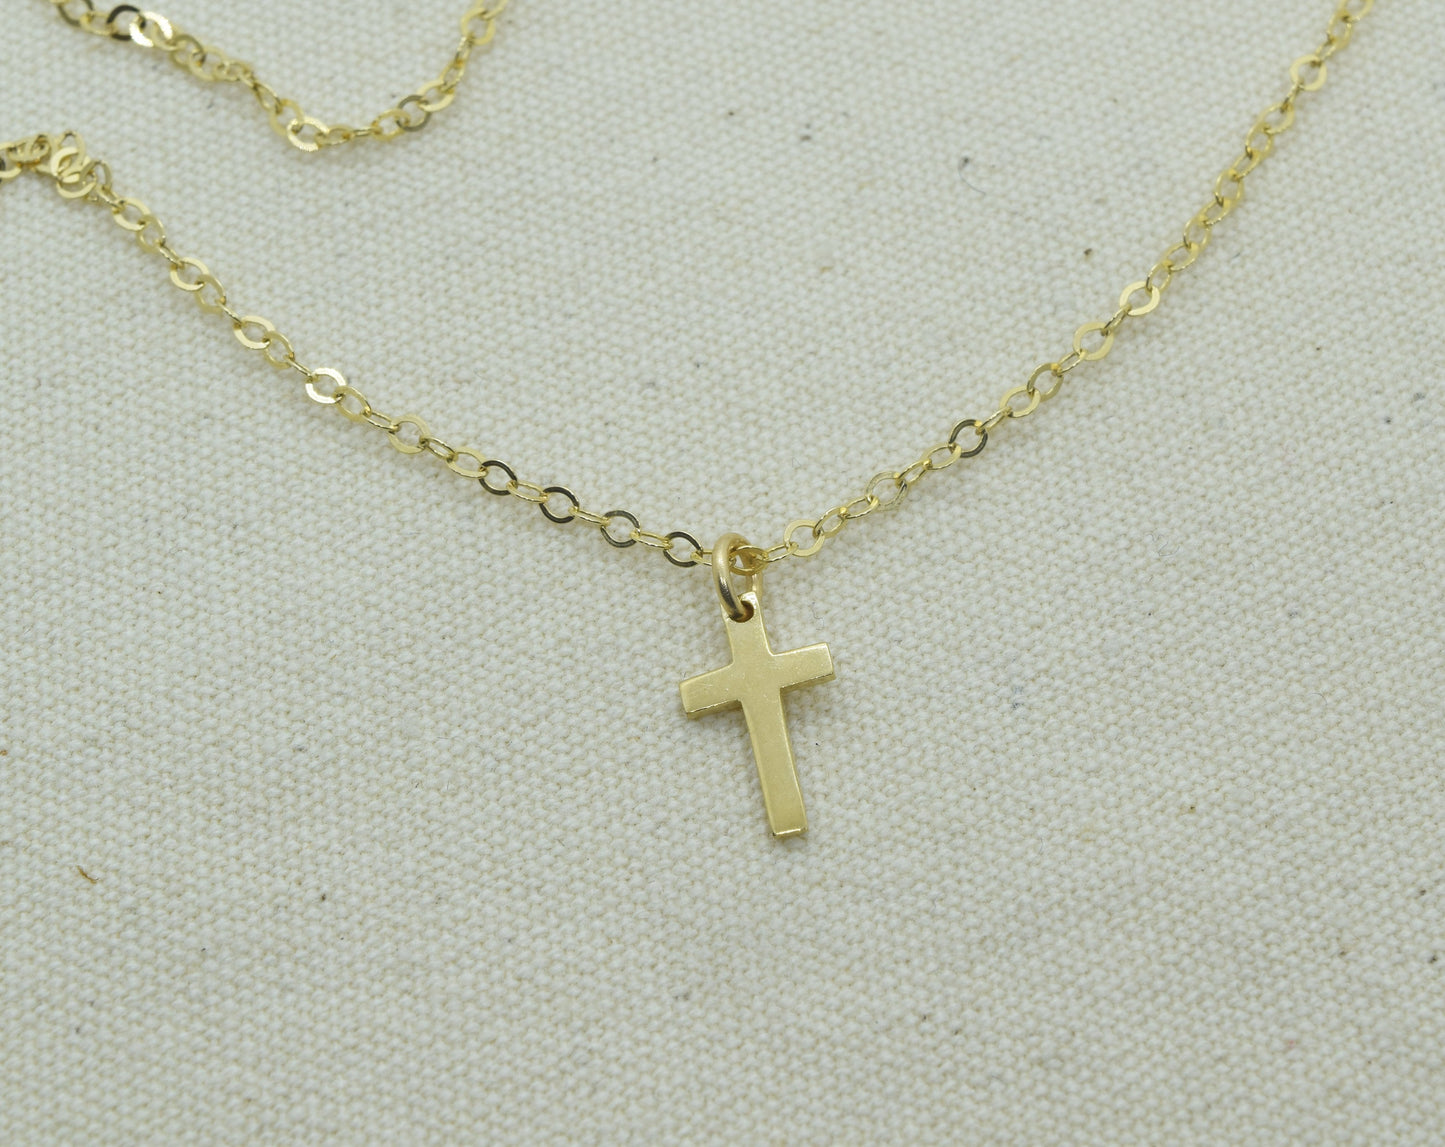 Tiny Gold Cross Charm Necklace, Small Cross Pendant, Baptism Christening Gift, First Communion, With Birthstone and Initial